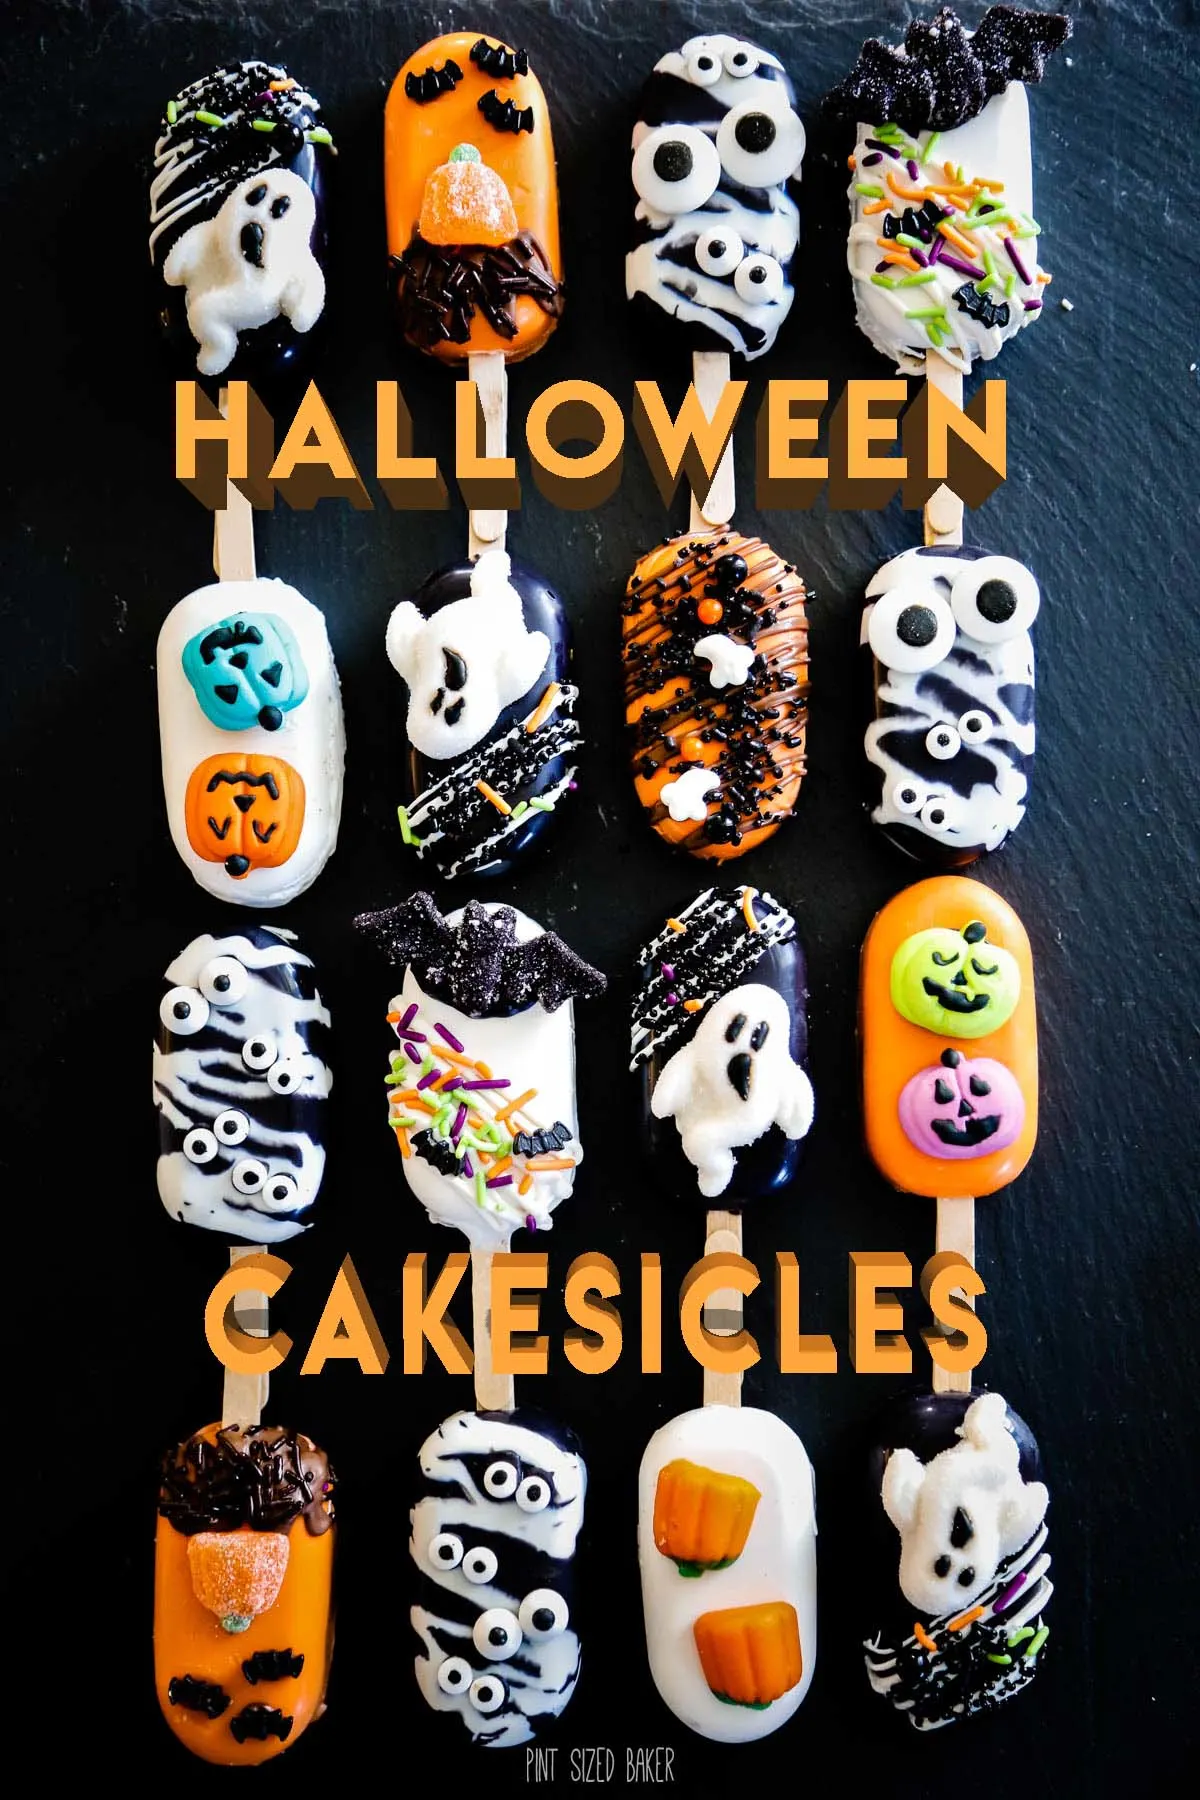 16 Caramel and Chocolate filled Cakesicles all decorated for Halloween!